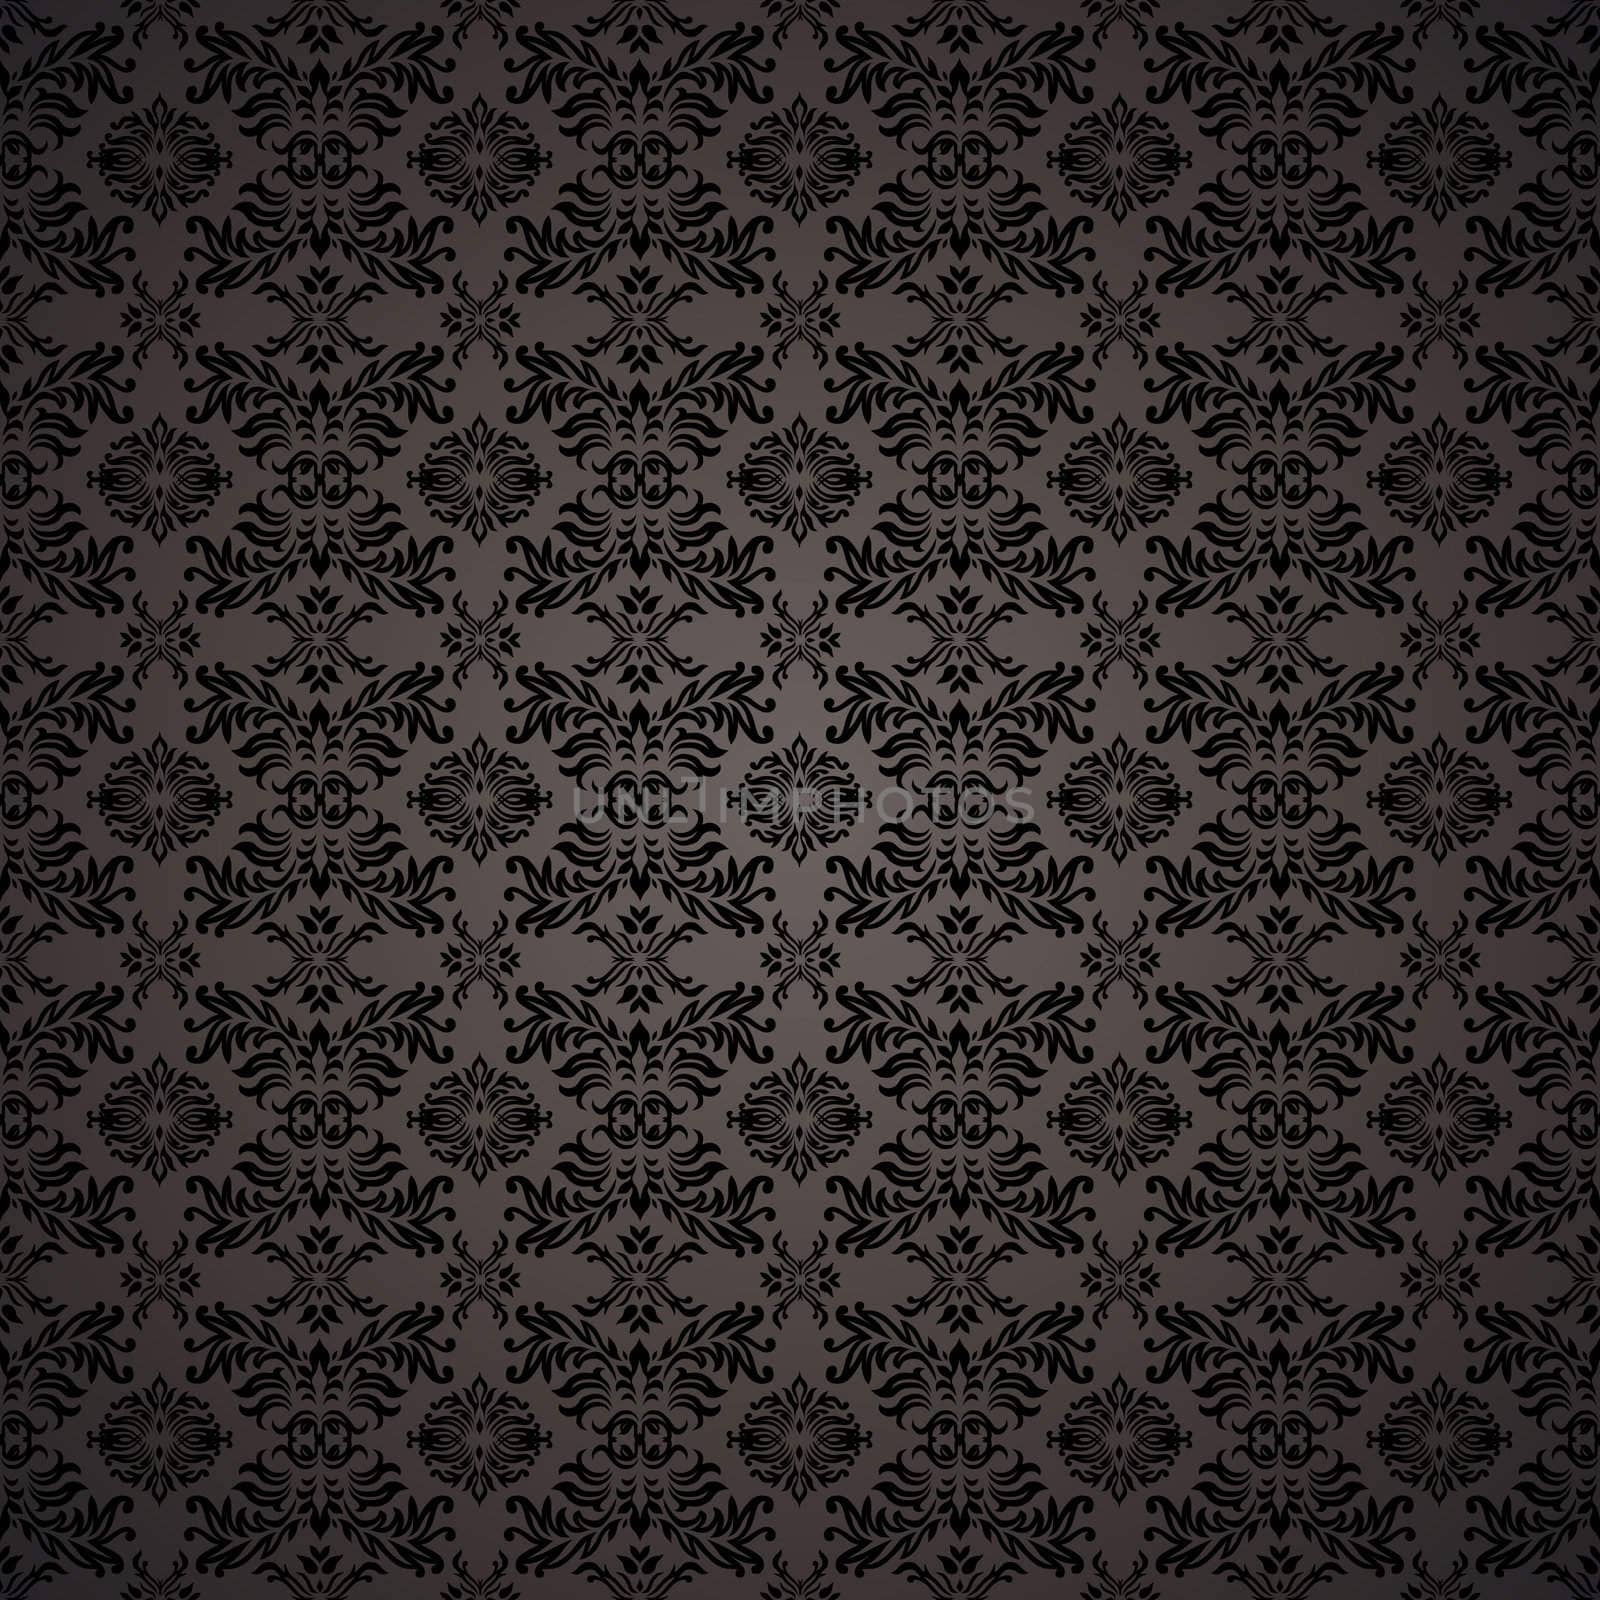 Black gothic repeating seamless wallpaper background design concept